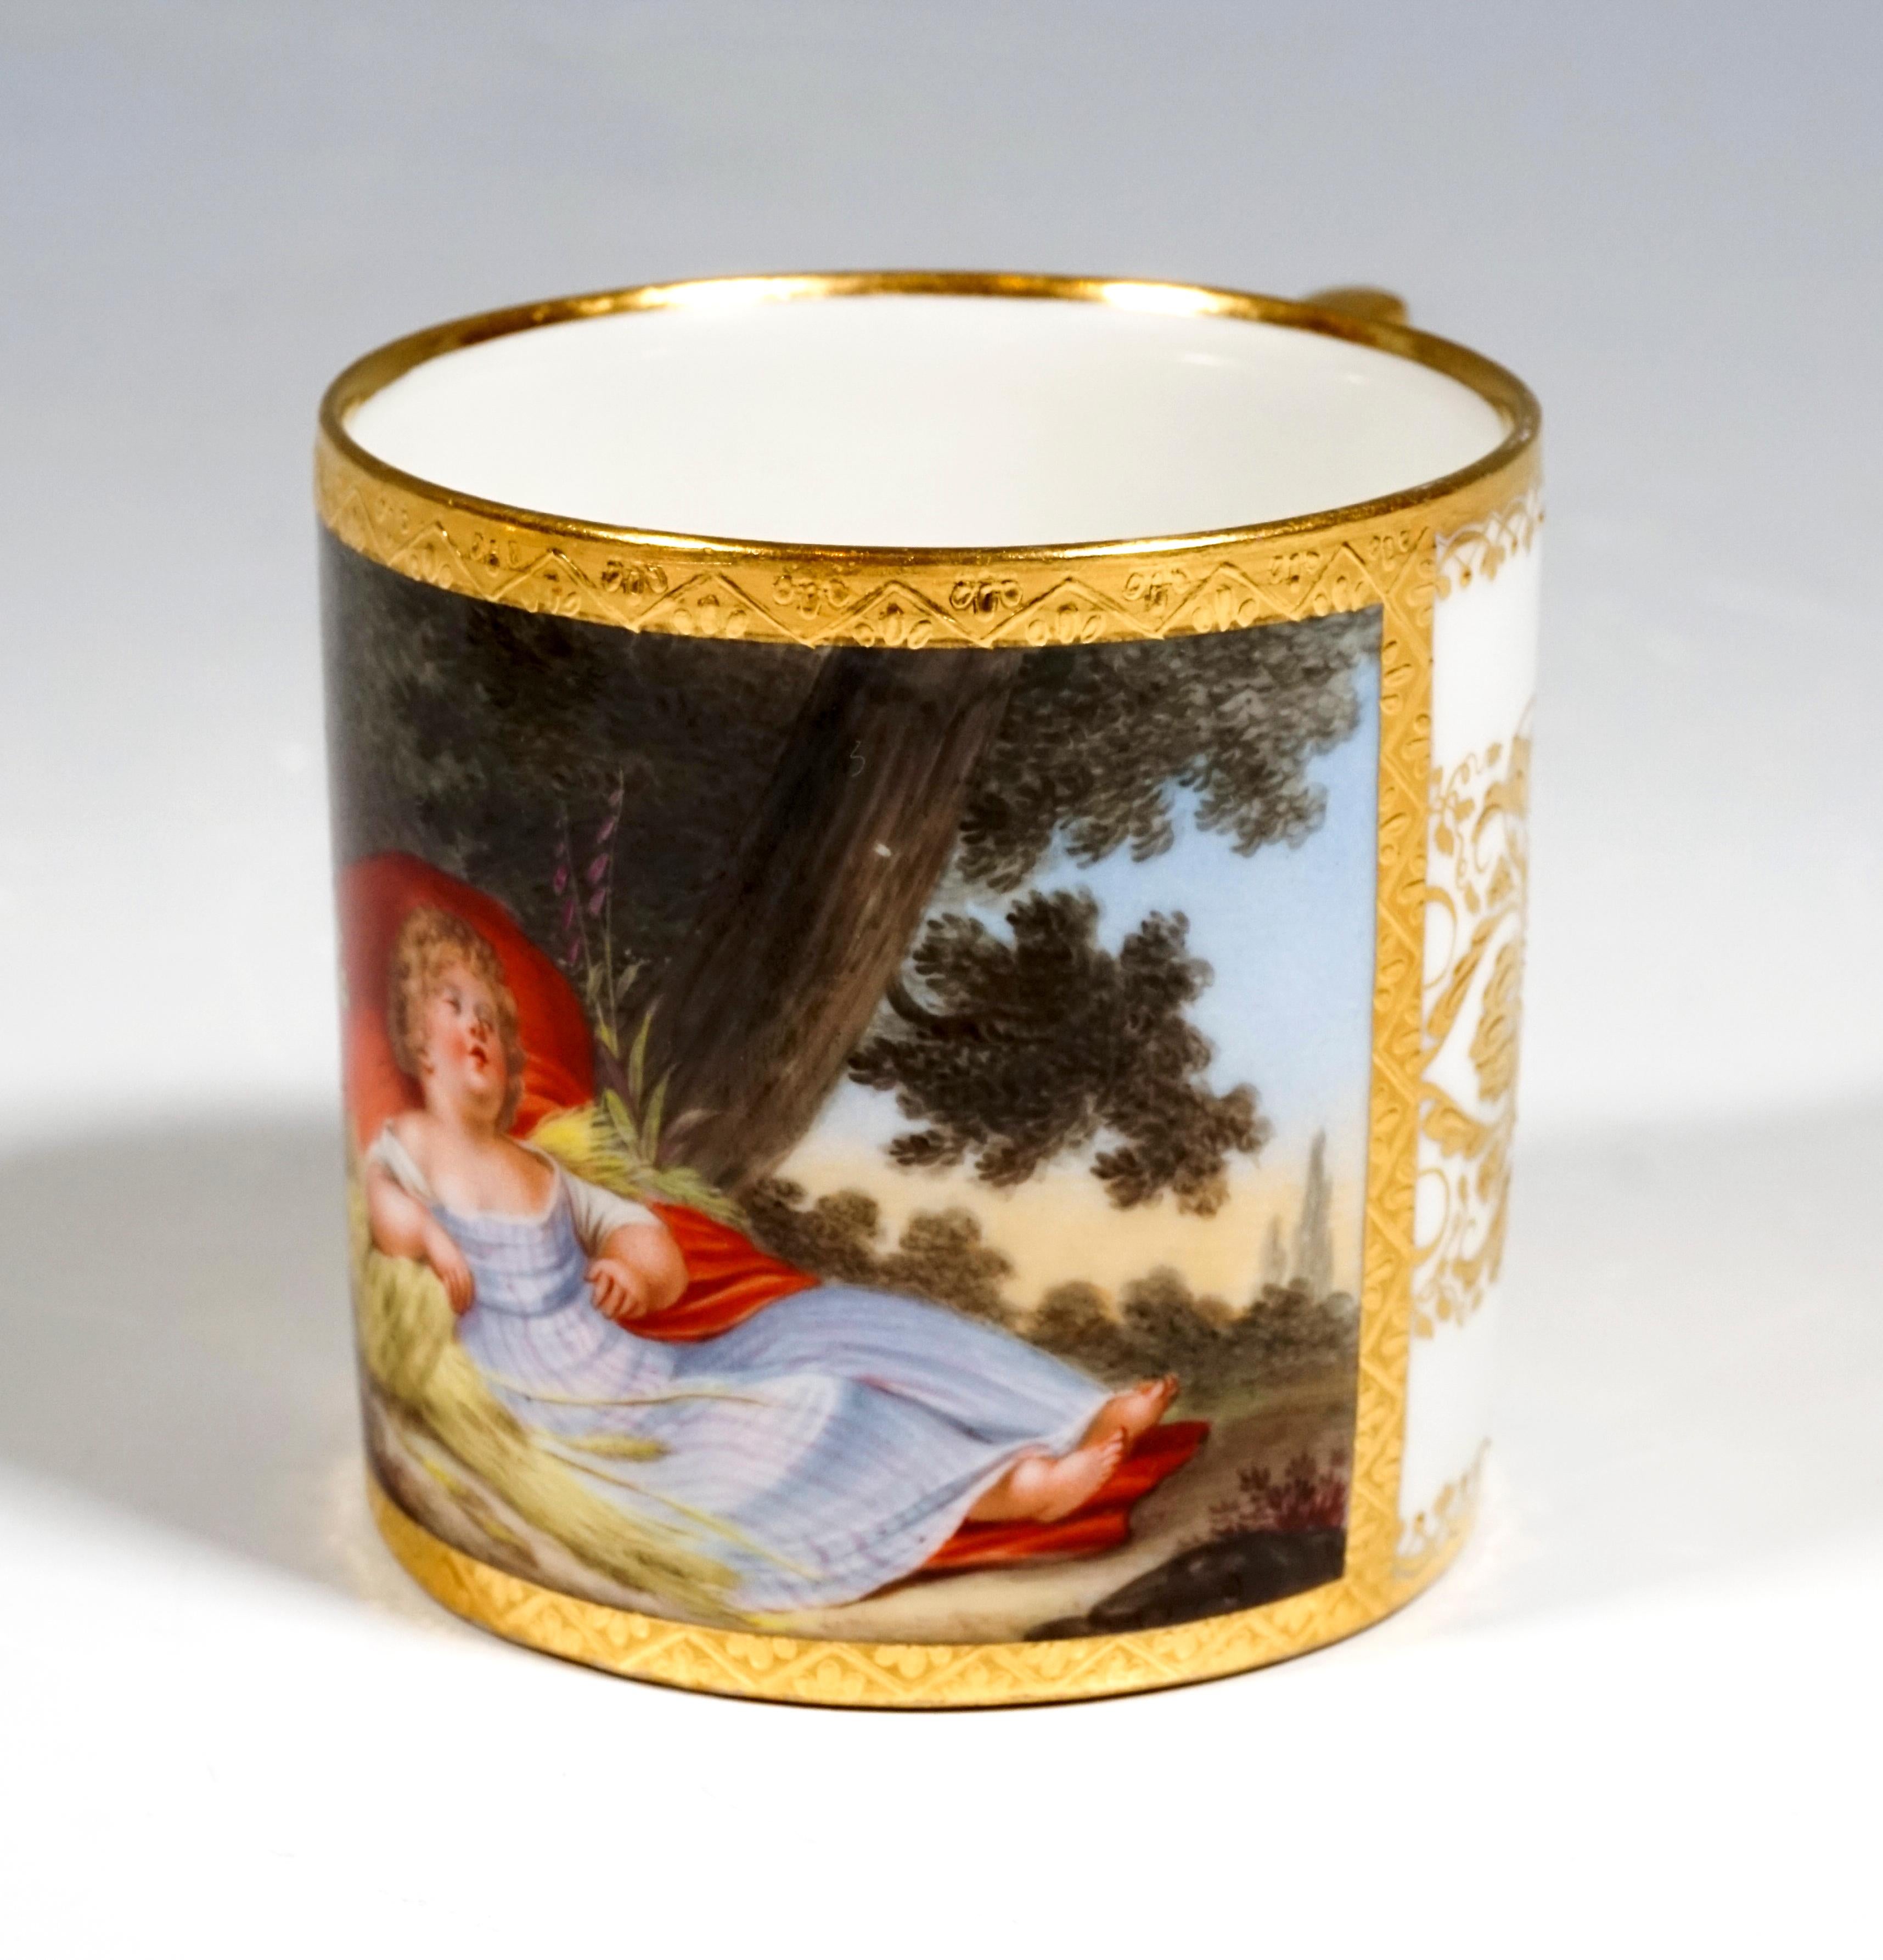 Austrian Viennese Imperial Porcelain Collecting Cup With Sleeping Girl, Sorgenthal, 1801